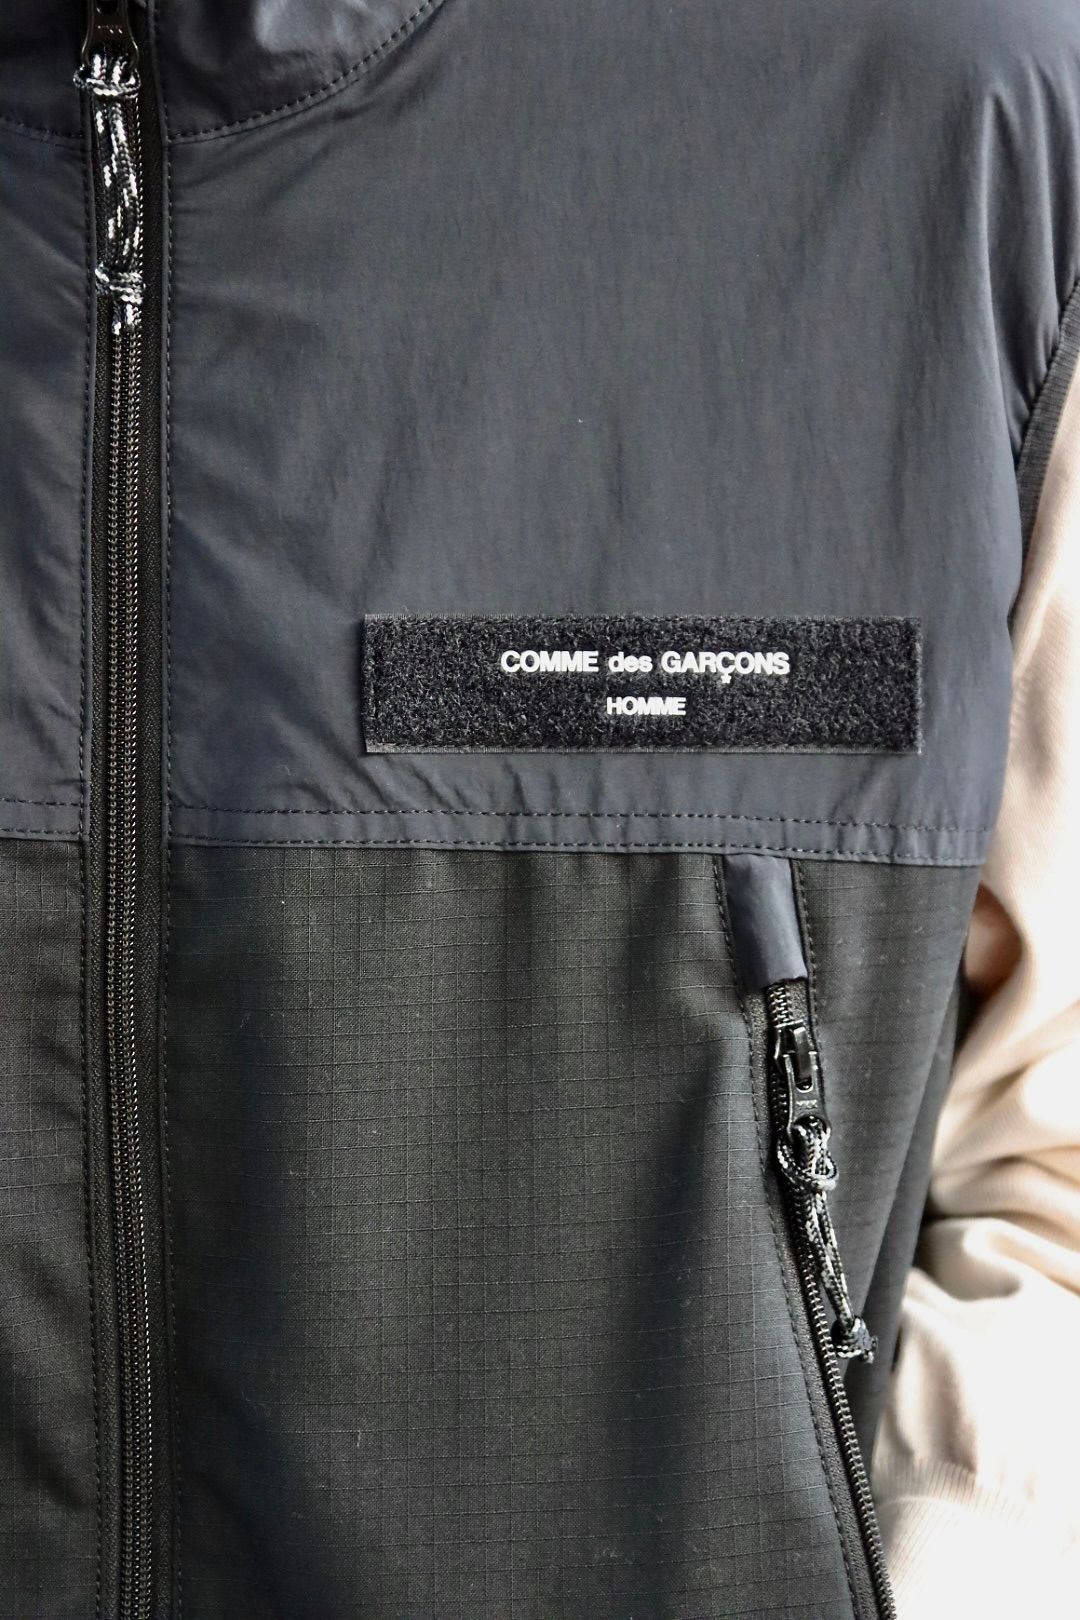 COMME des GARCONS HOMME 23SS ジップアップベストスタイル | 3194 | mark